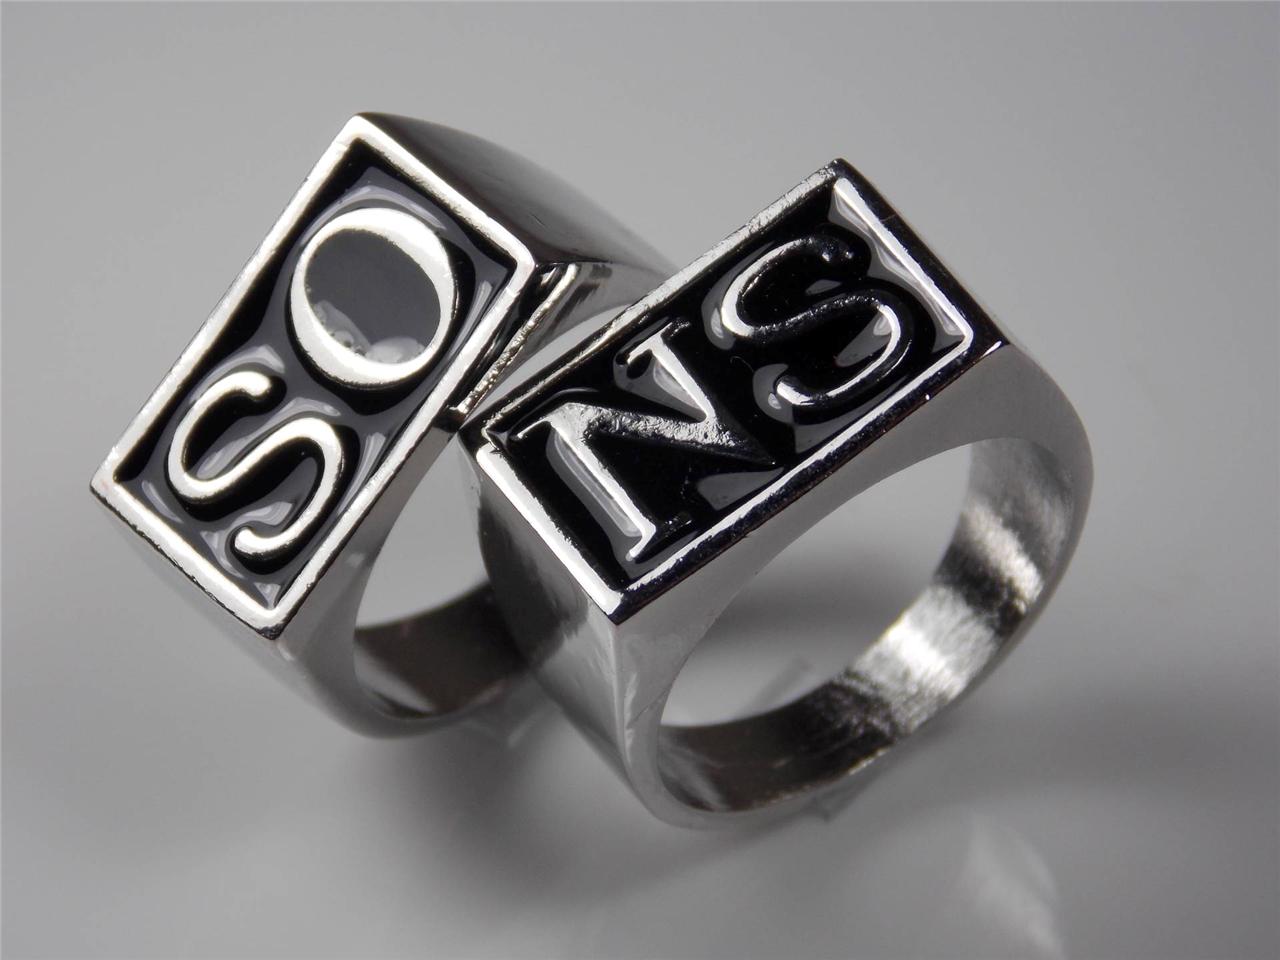 Silver Plated Men's Son's of Anarchy Jax Teller Band Ring Set UKT US10